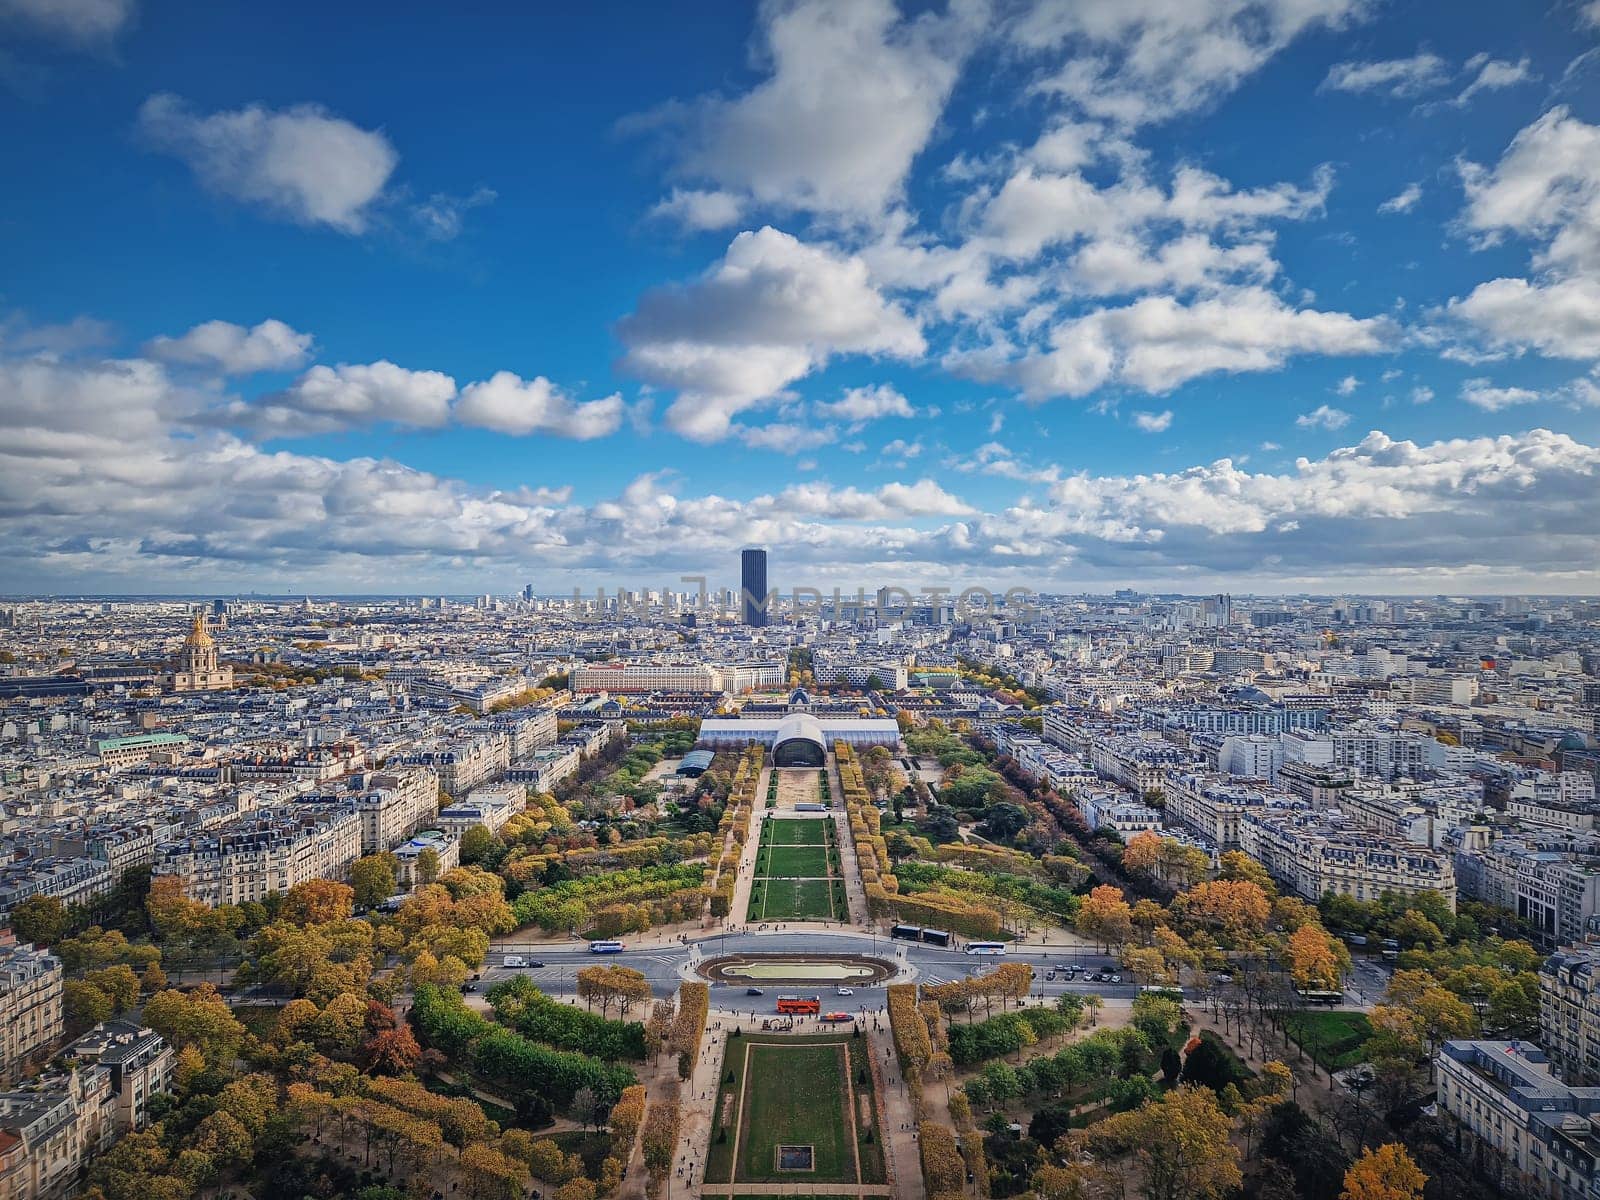 Paris cityscape view from the Eiffel tower heights, France. Montparnasse tower and Les Invalides seen on the horizon panorama. Beautiful autumn colors by psychoshadow